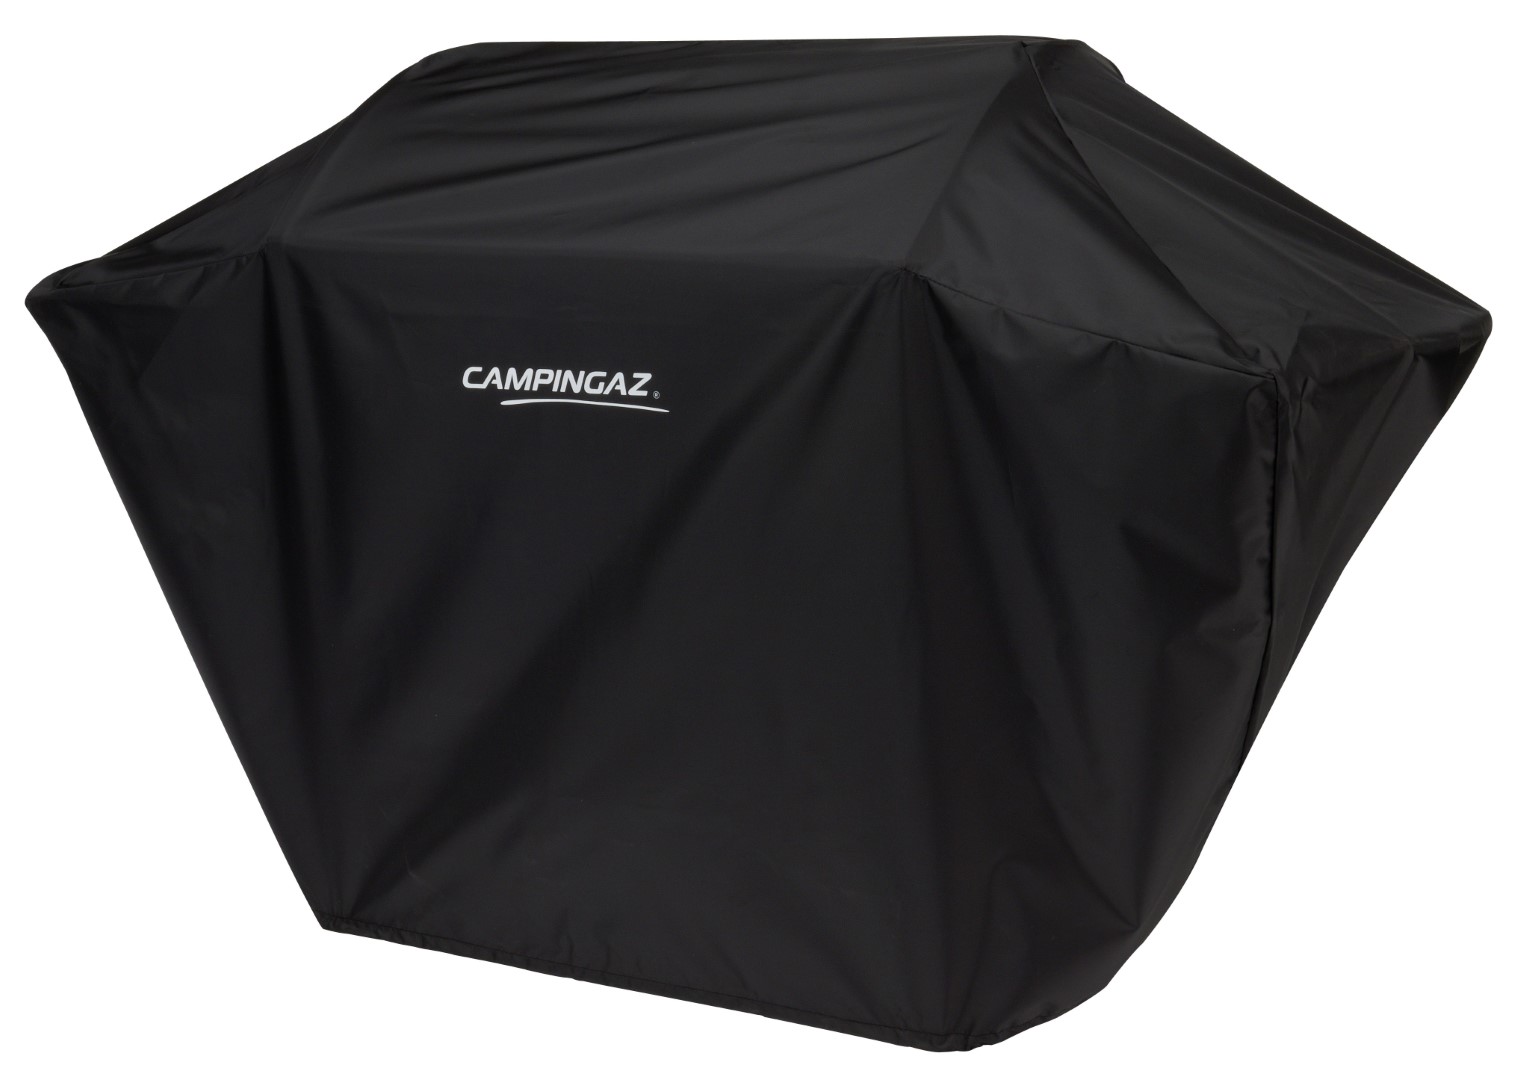 https://www.warentuin.nl/media/catalog/product/S/C/SCAN03138522119386_campingaz_barbecue_accessoire_barbecue_classic_cover_xl_4f2a.jpg